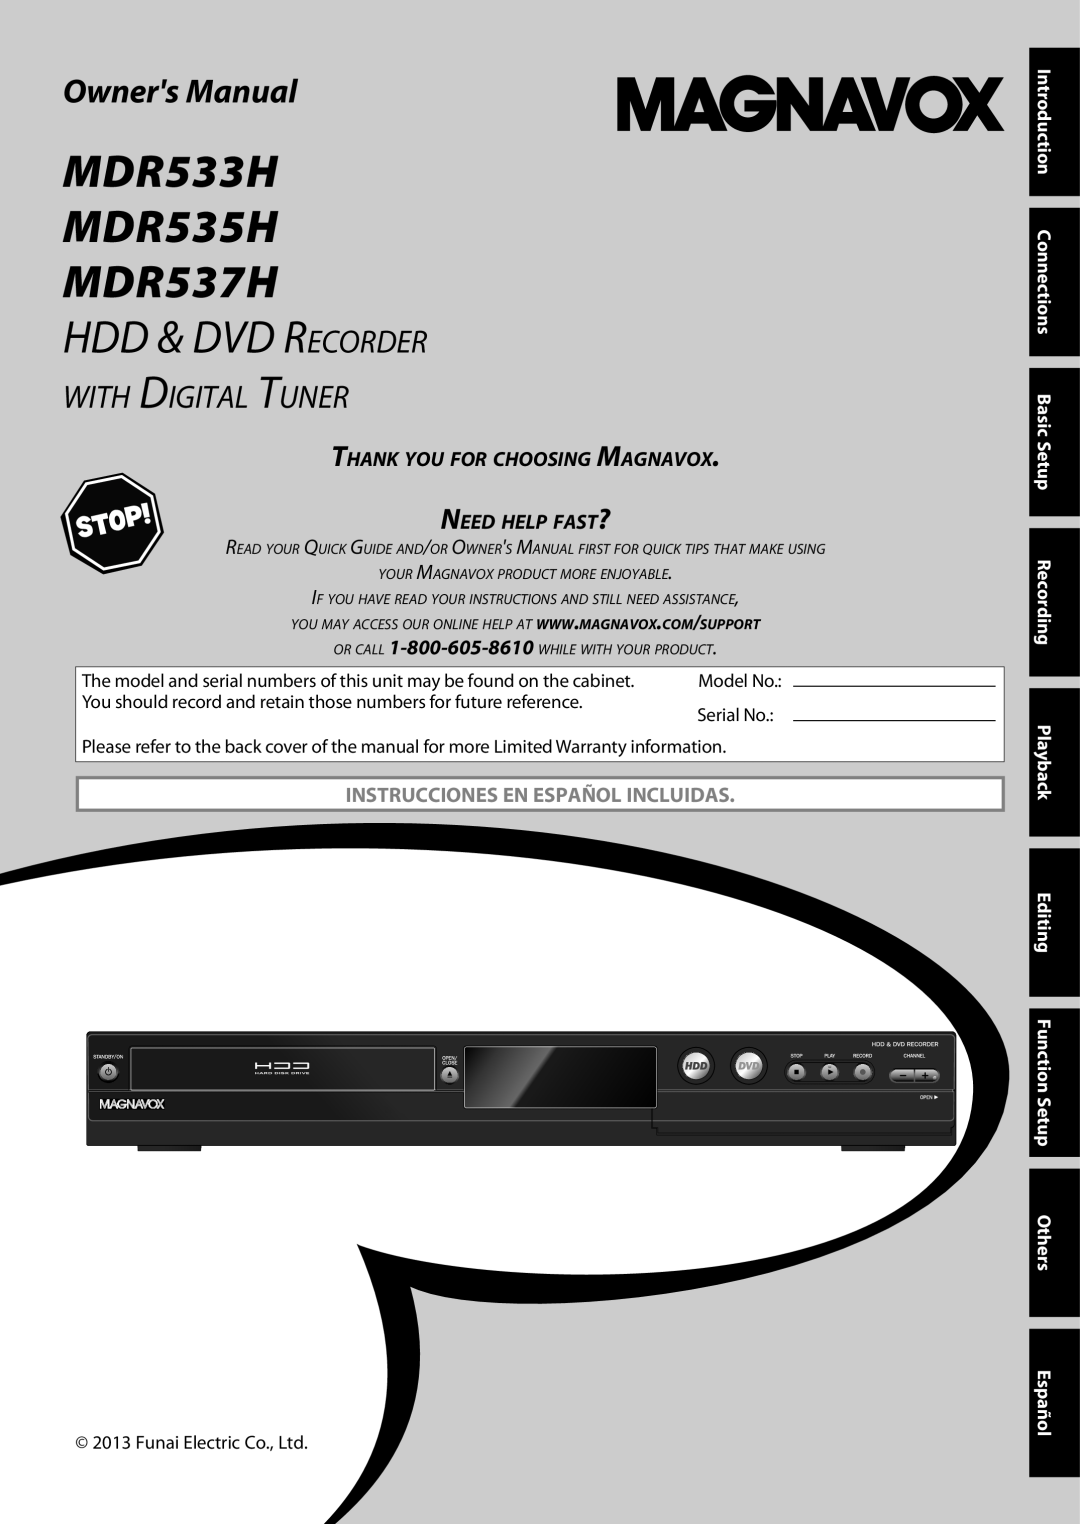 Magnavox owner manual MDR533H MDR535H MDR537H, HDD & DVD Recorder, Owners Manual, with Digital Tuner 